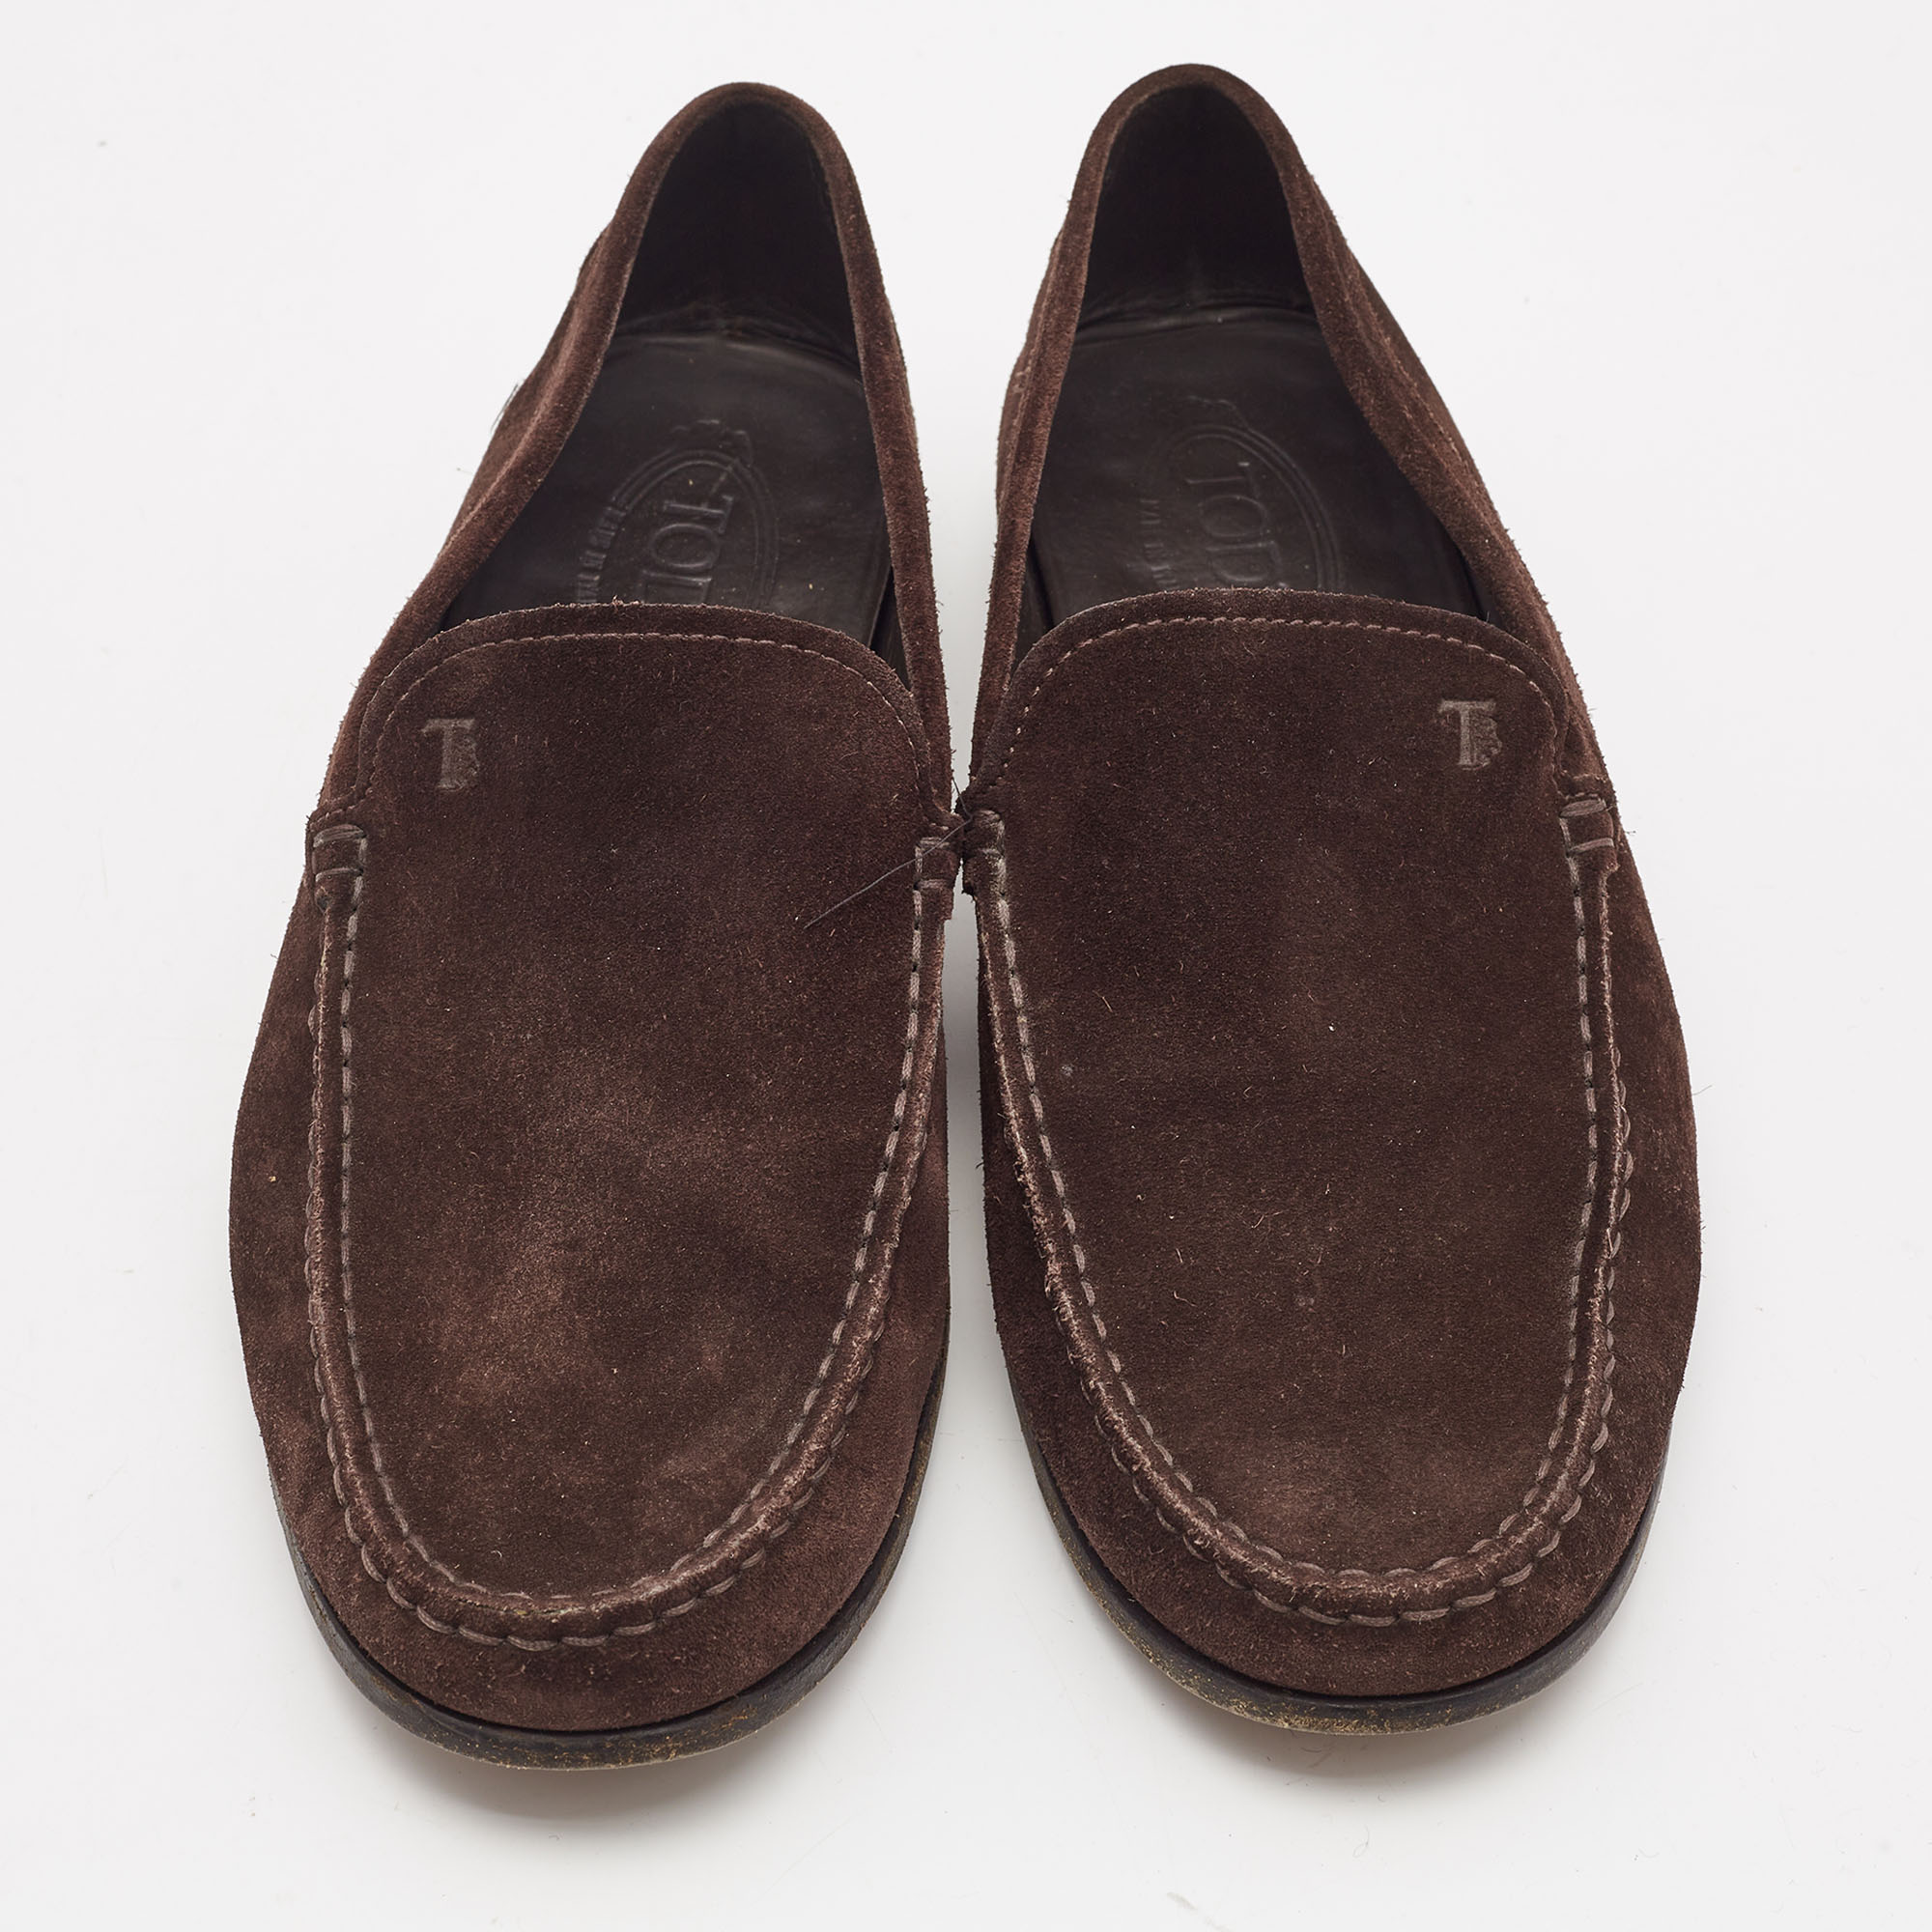 Tod's Dark Brown Suede Slip On Loafers Size 43